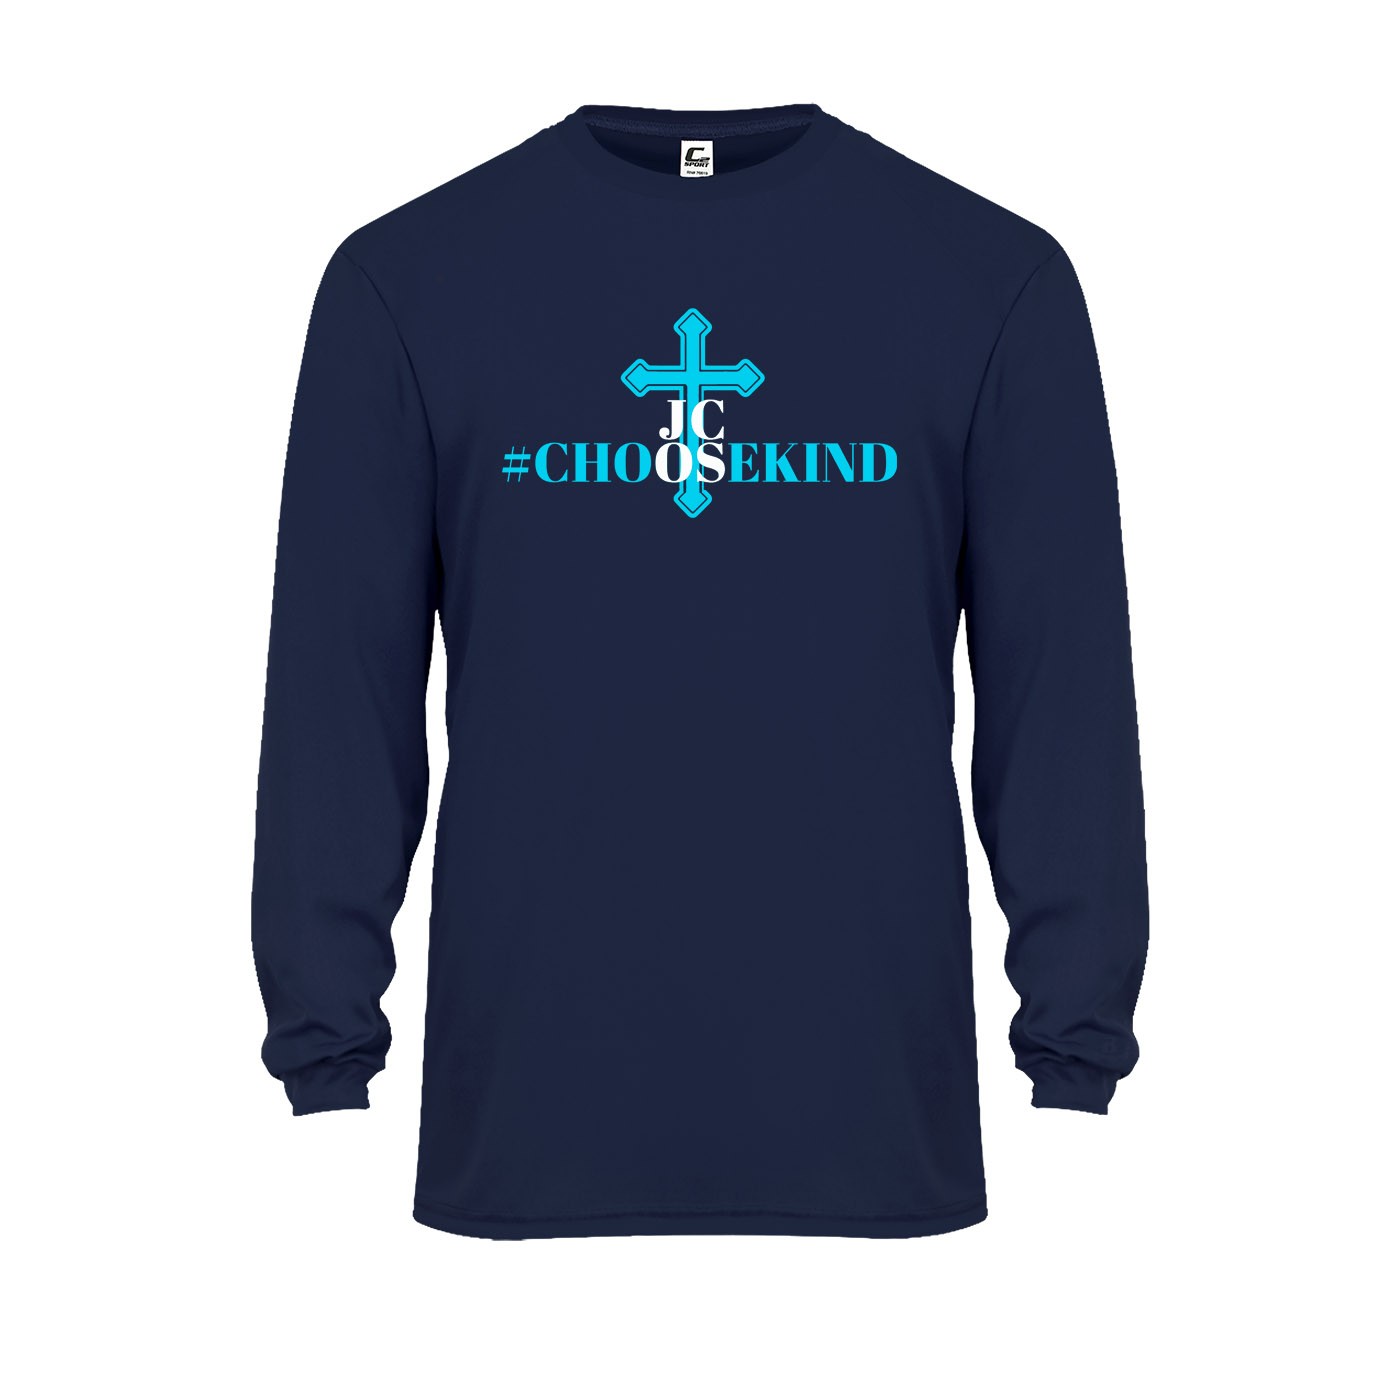 JCOS Staff L/S Performance T-Shirt w/ Choose Kindness Logo #F38- Please Allow 3-4 Weeks for Delivery